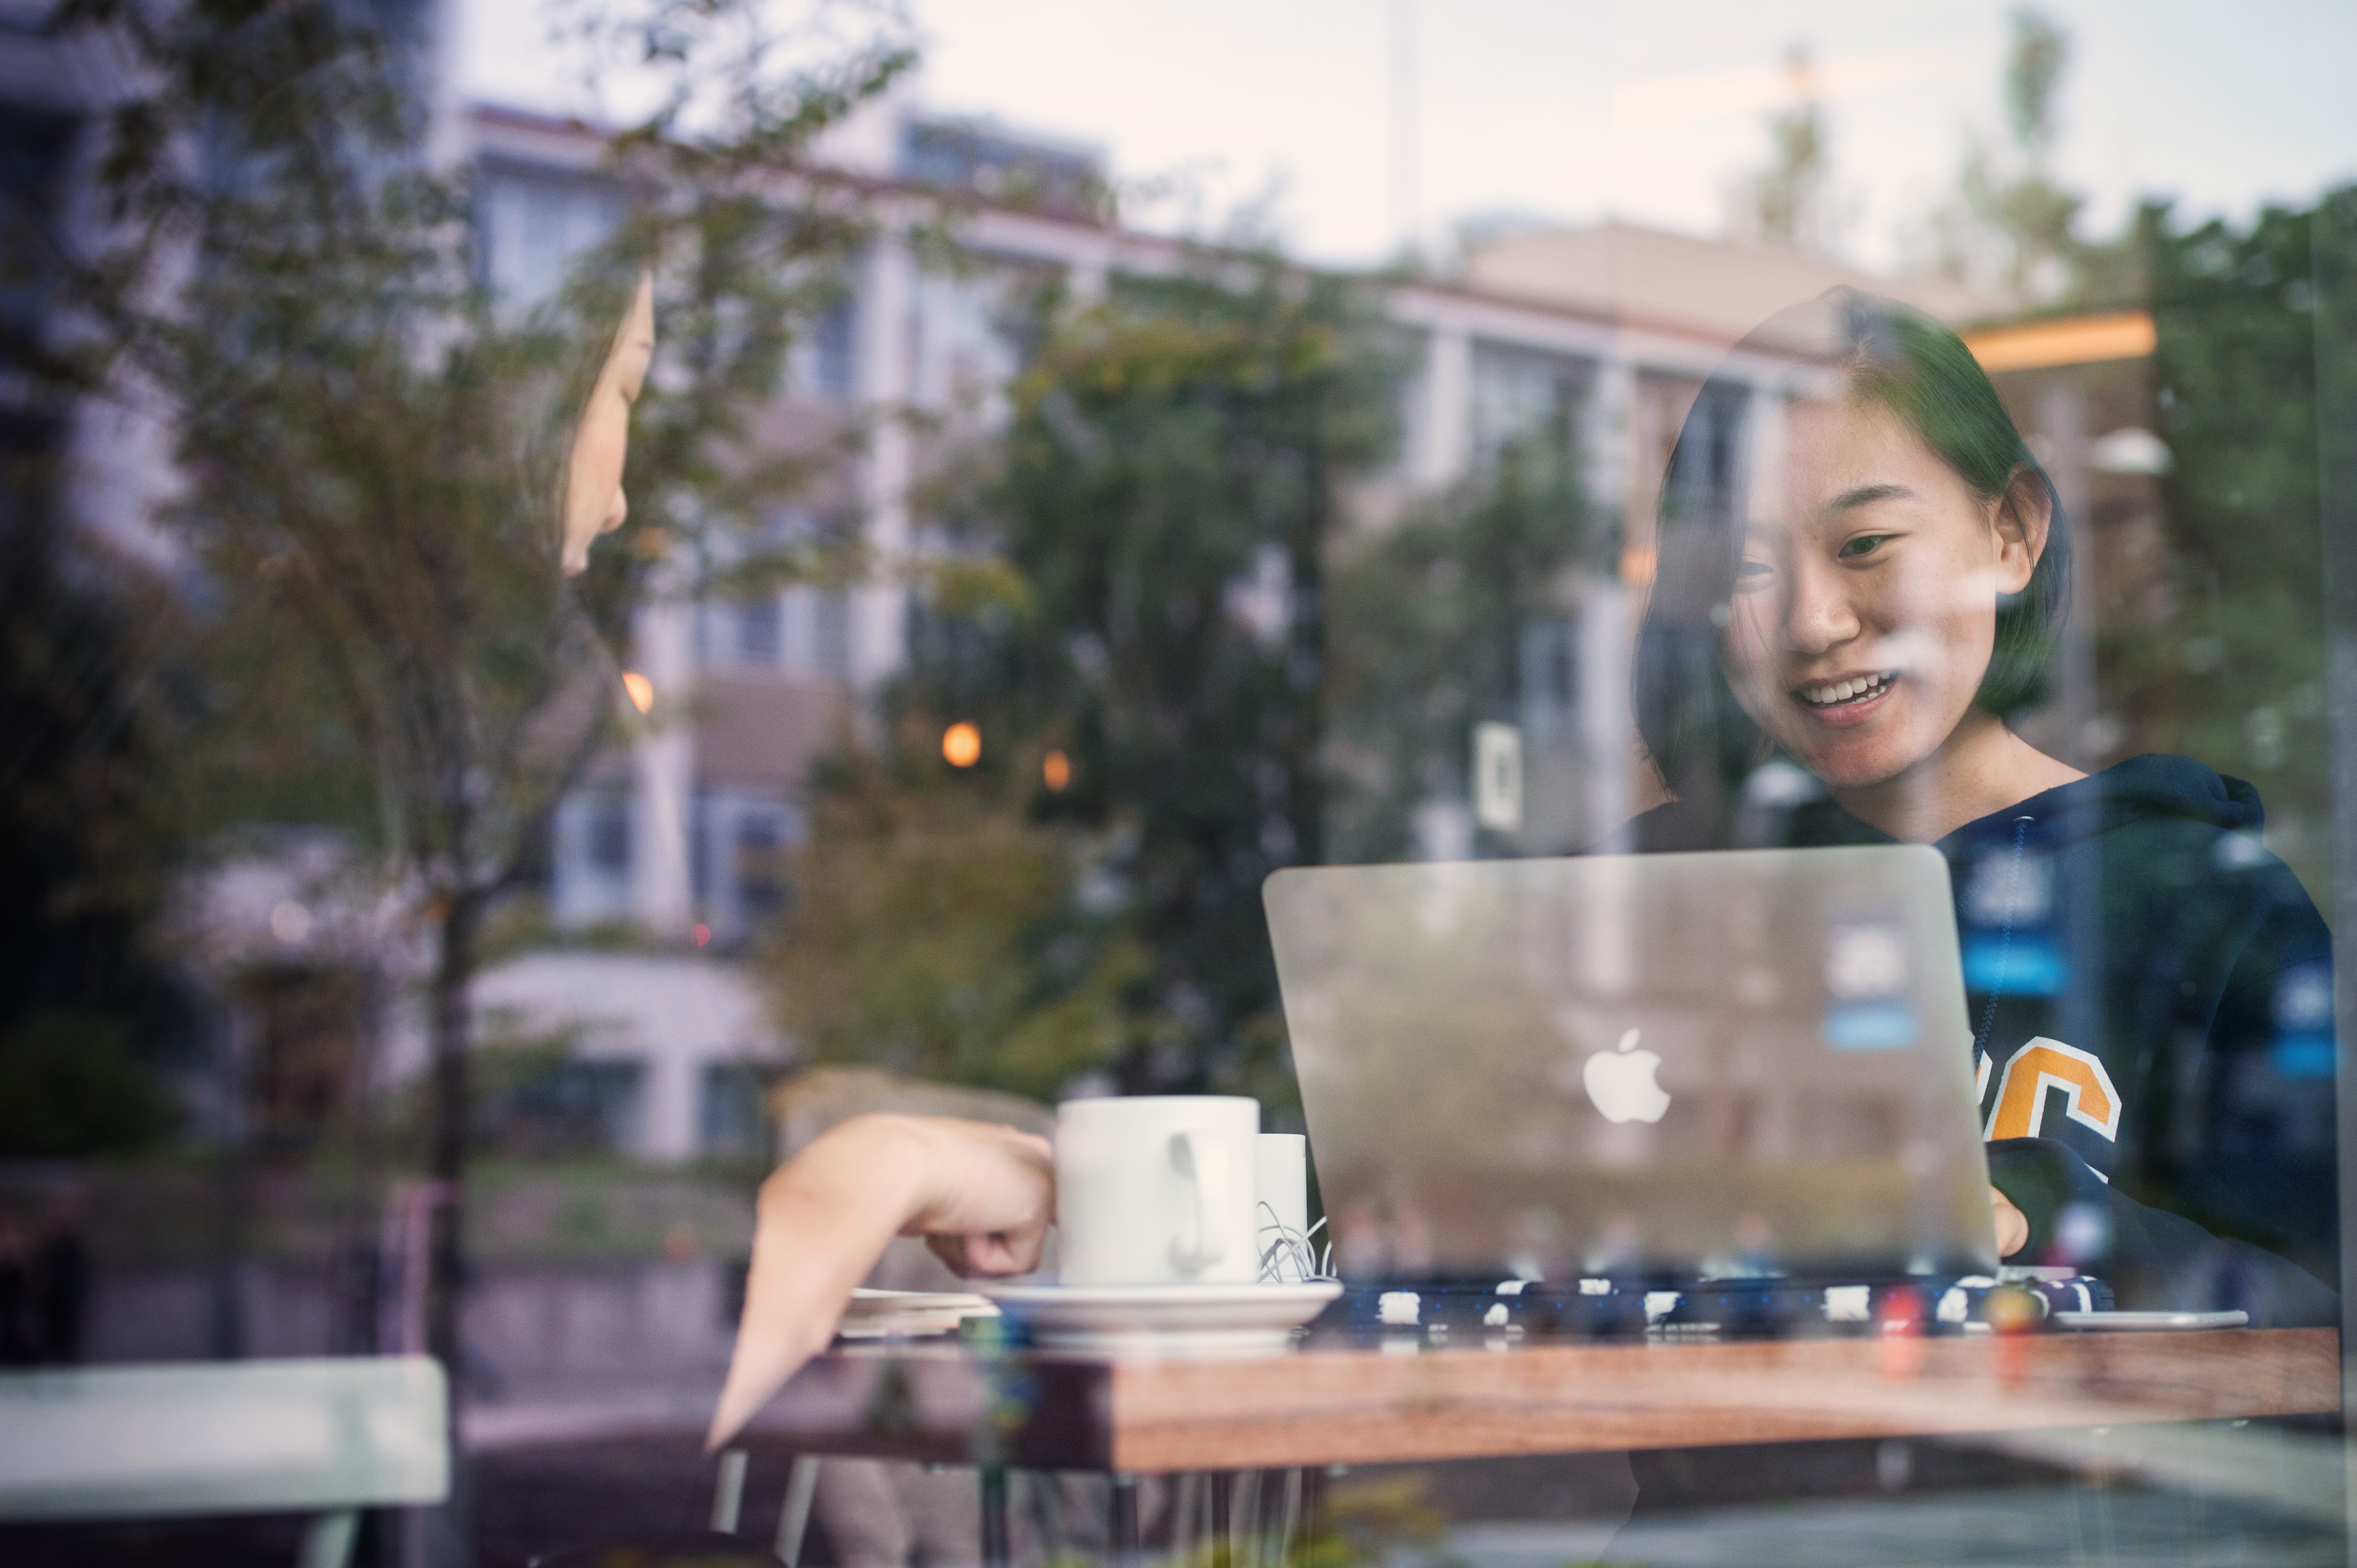 A young Asian woman smiles at her laptop in a cafe, where she sits alone at a table with a mug, earphones and a laptop bag. The large glass window reflects the outside of the cafe: trees, a building, lights.